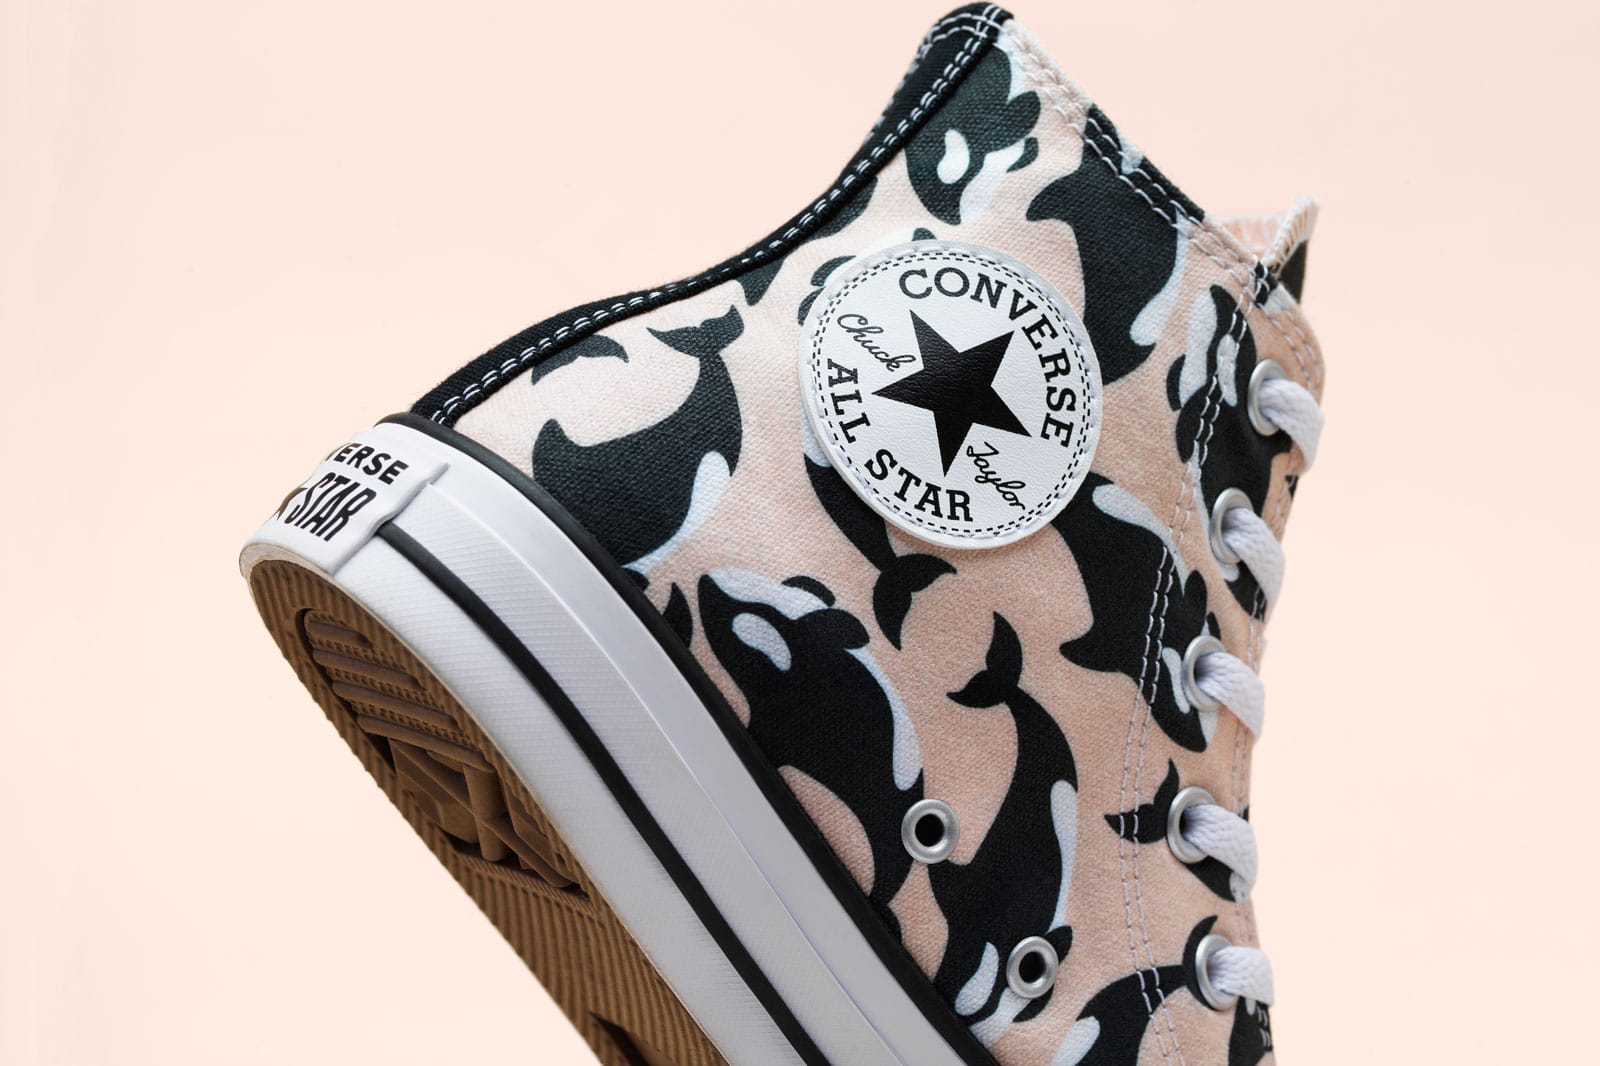 Millie Bobby Brown x Converse Whale 